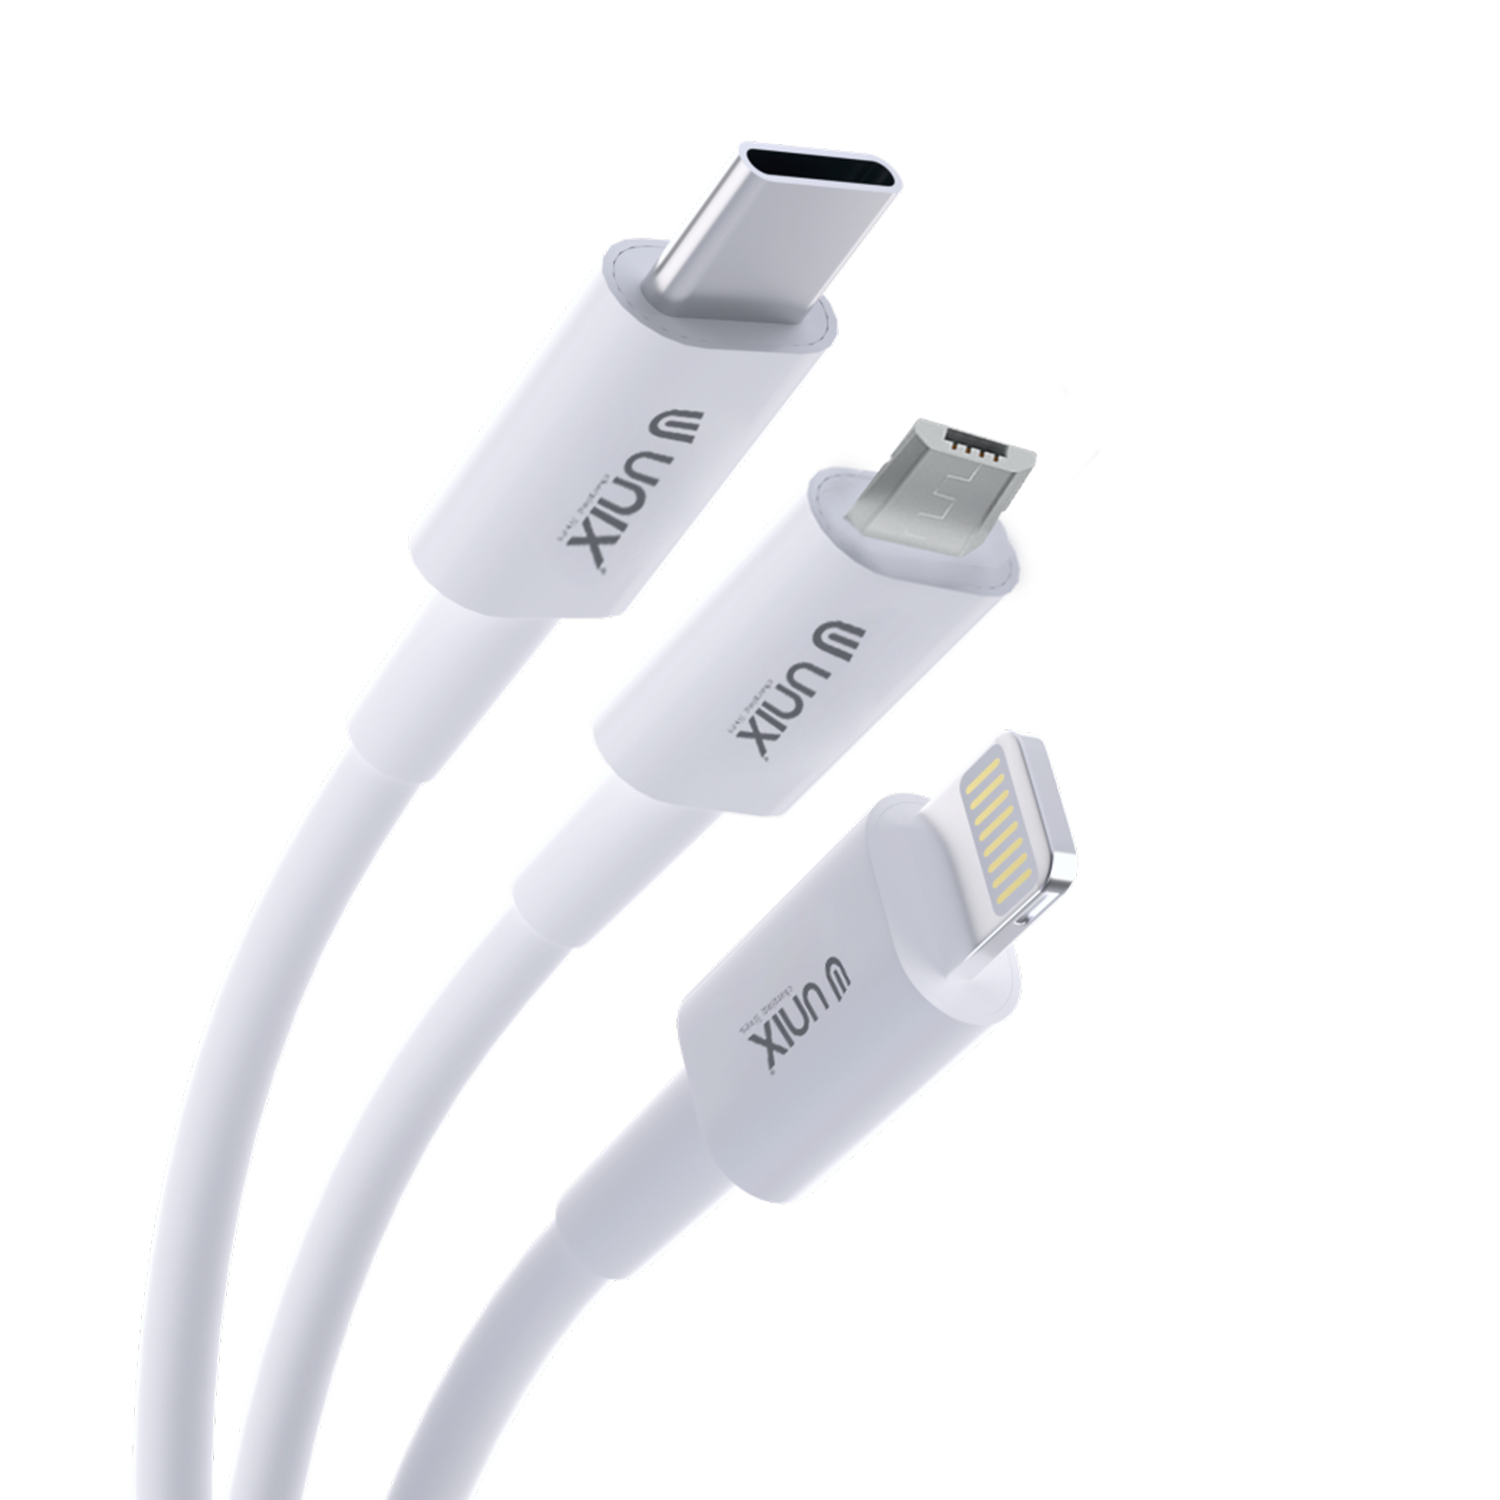 Unix UX-T22 3-in-1 Fast Charging Data Cable - Type-C, N70, Lightning (Copy)